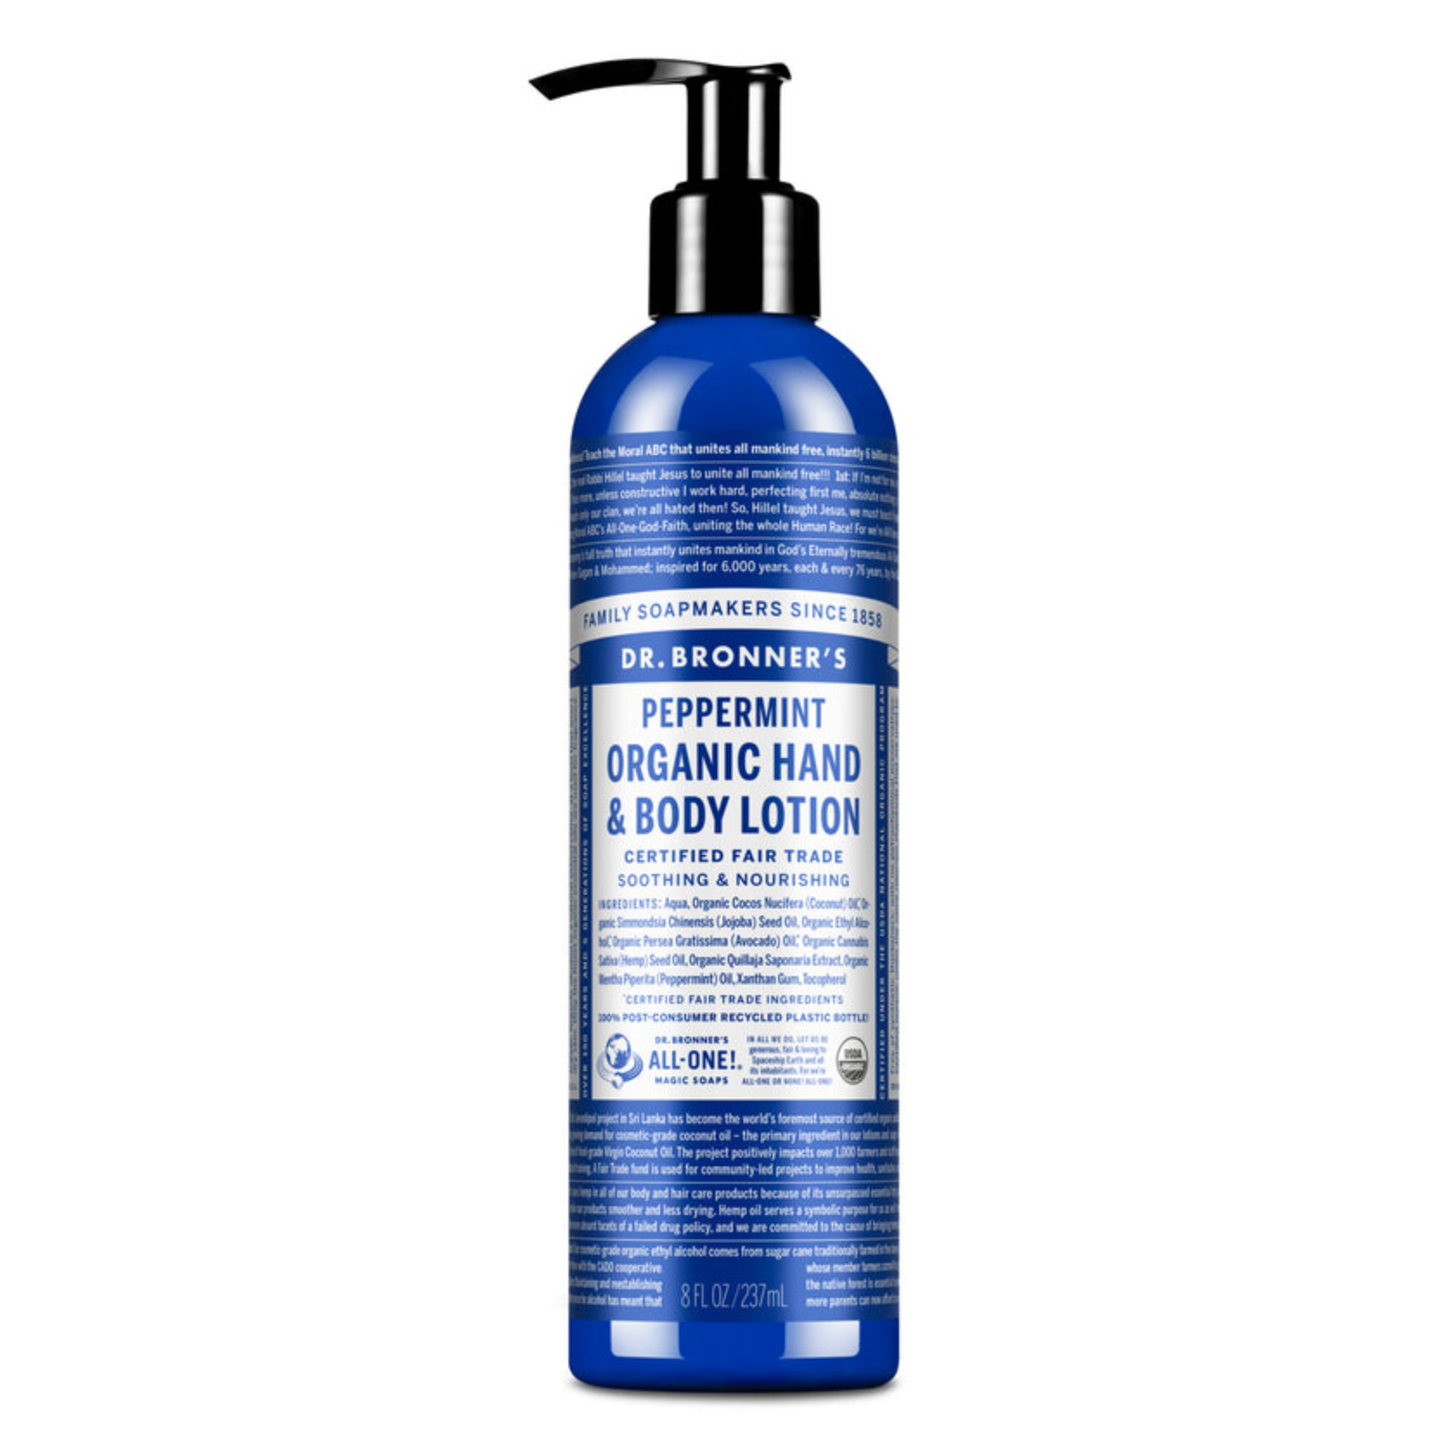 Dr Bronner's Organic Hand & Body Lotion 237ml, Peppermint